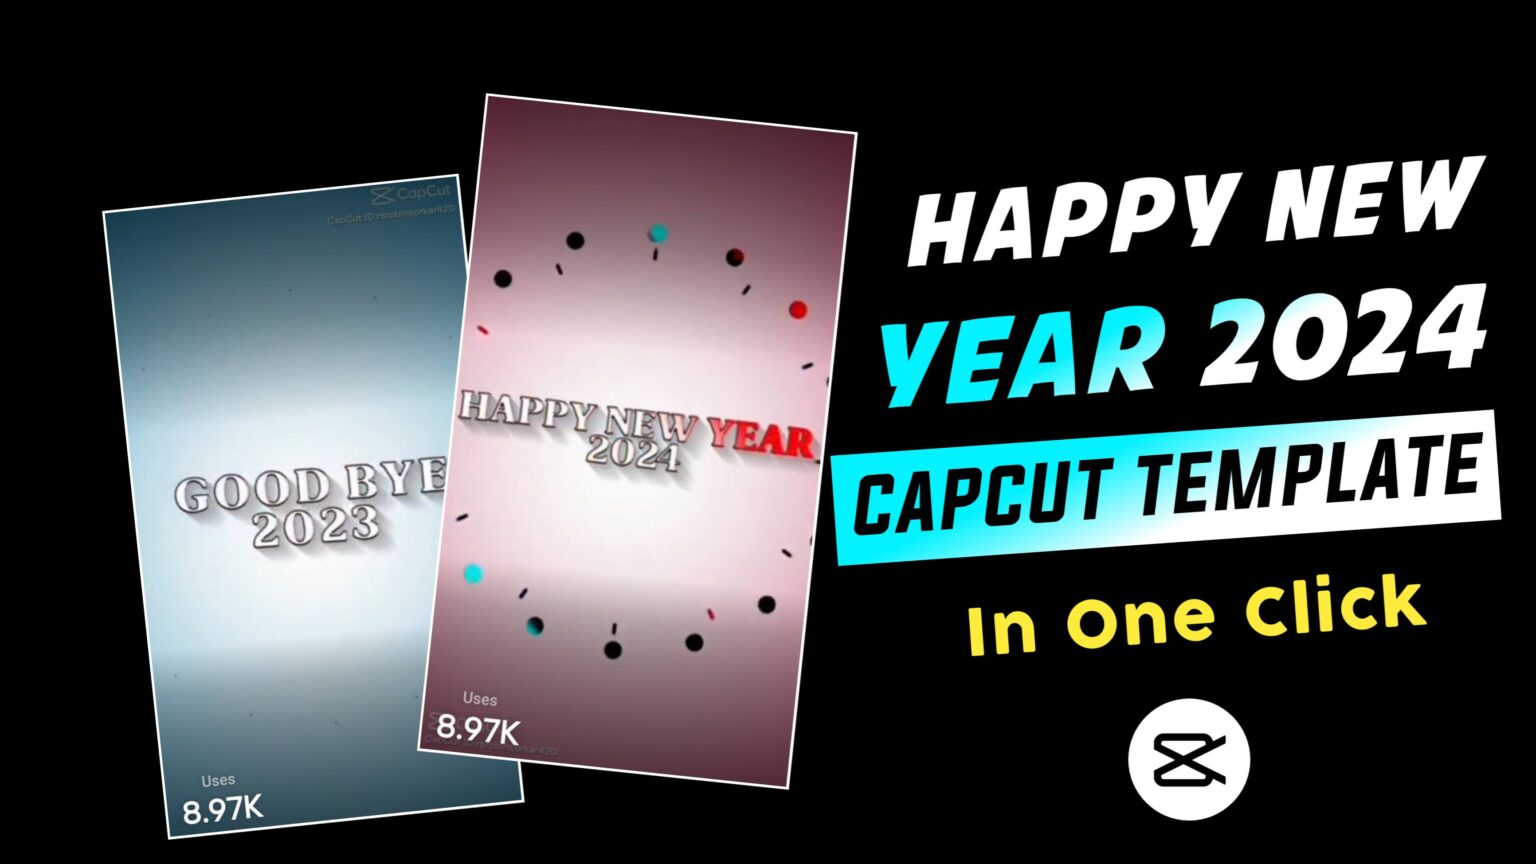 Happy New Year 2024 CapCut Template Link (100% Working Template)